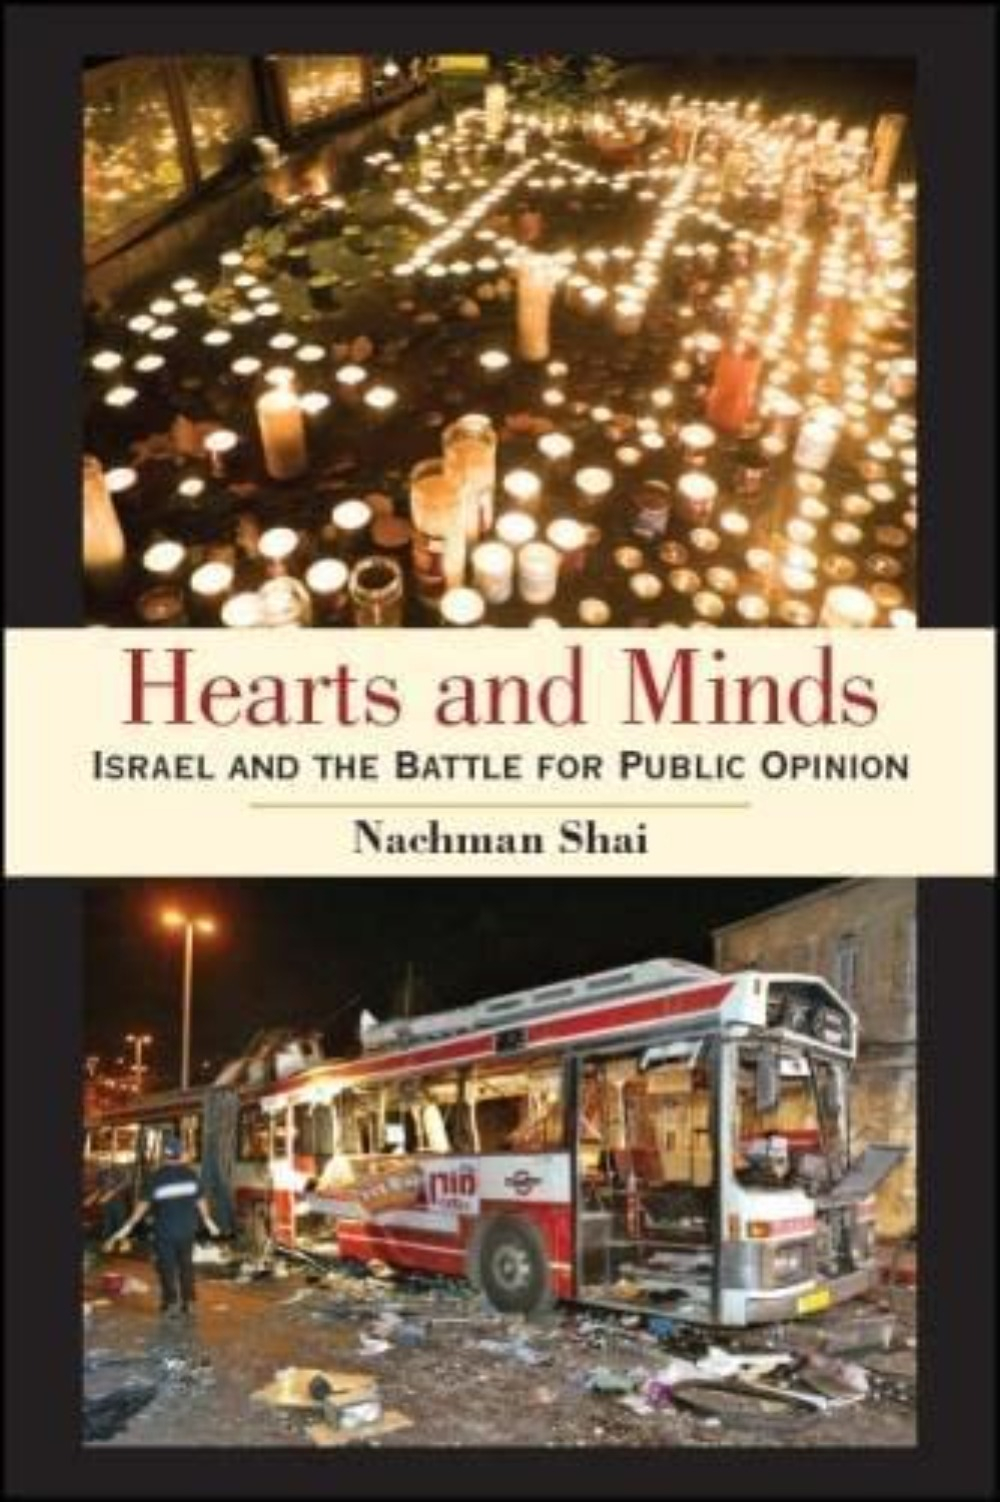 Hearts and Minds by Nachman Shai